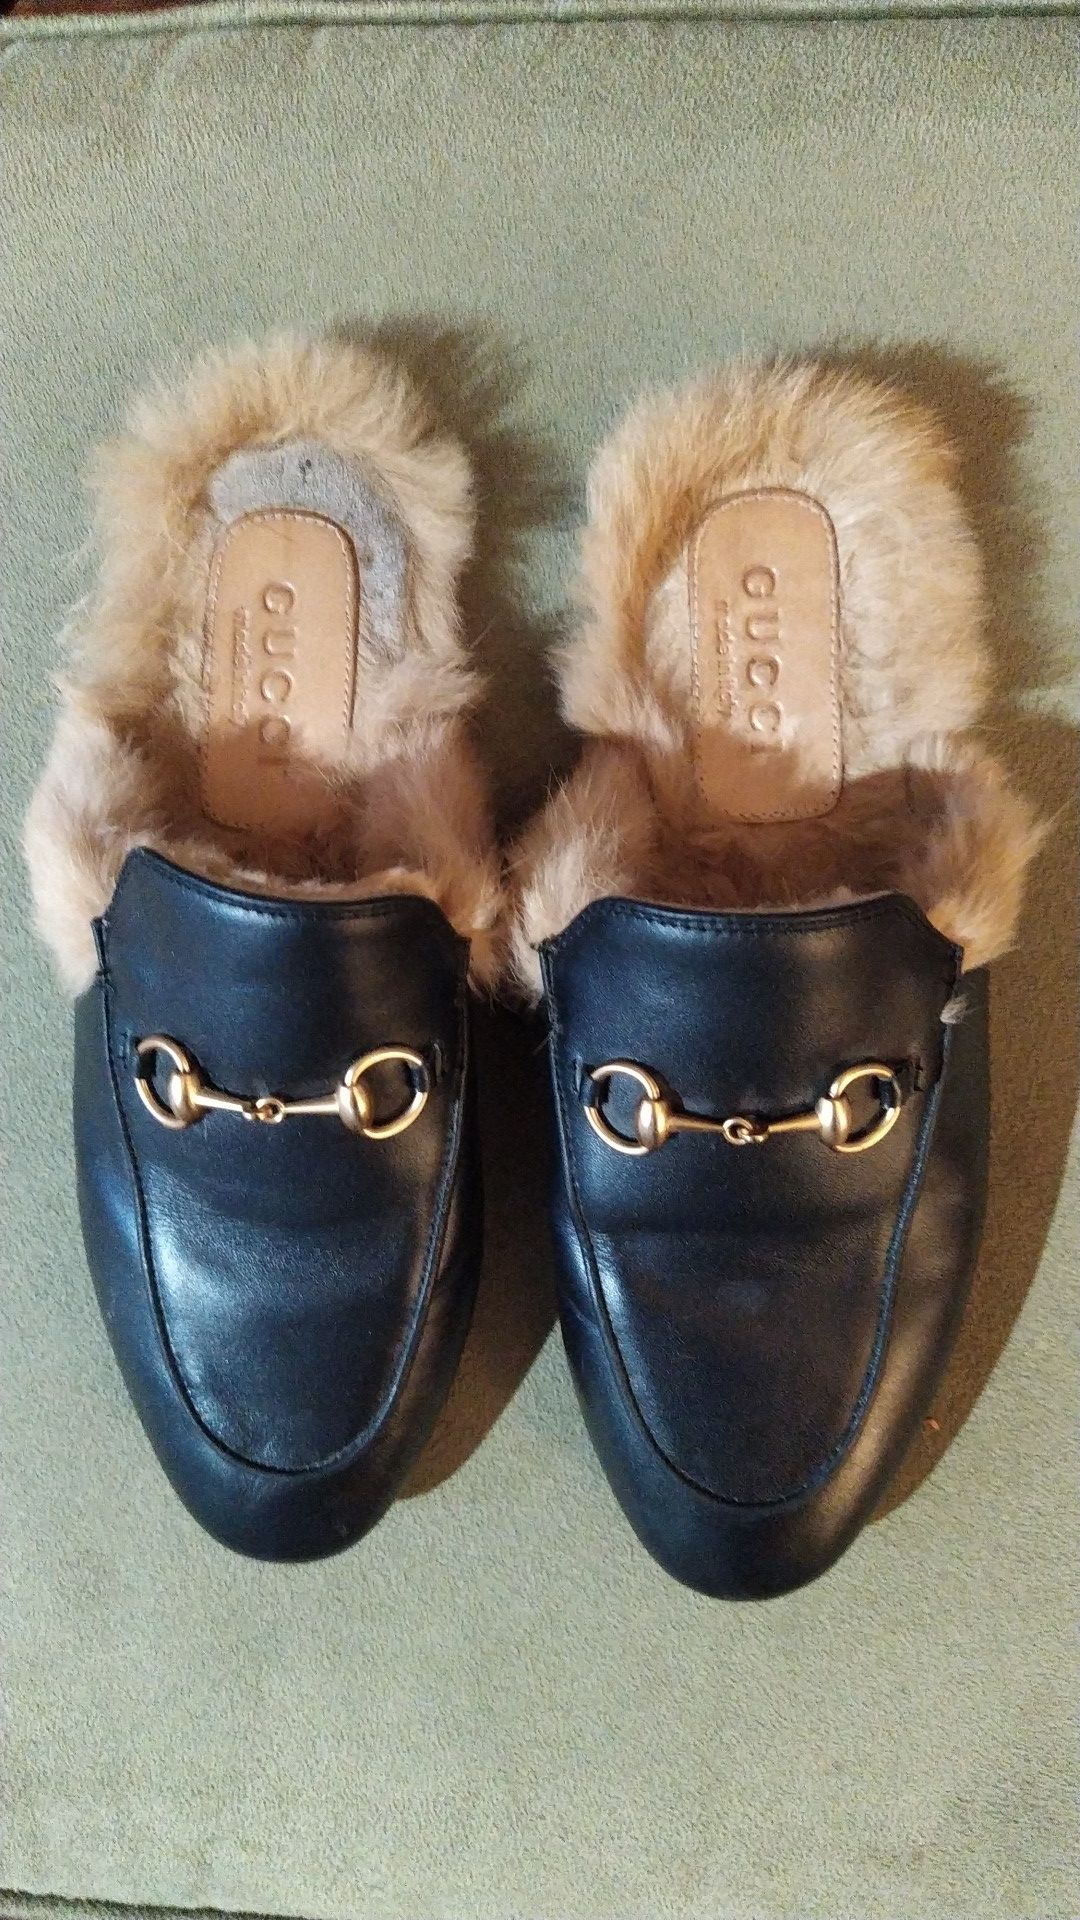 Gucci princetown leather mules with fur